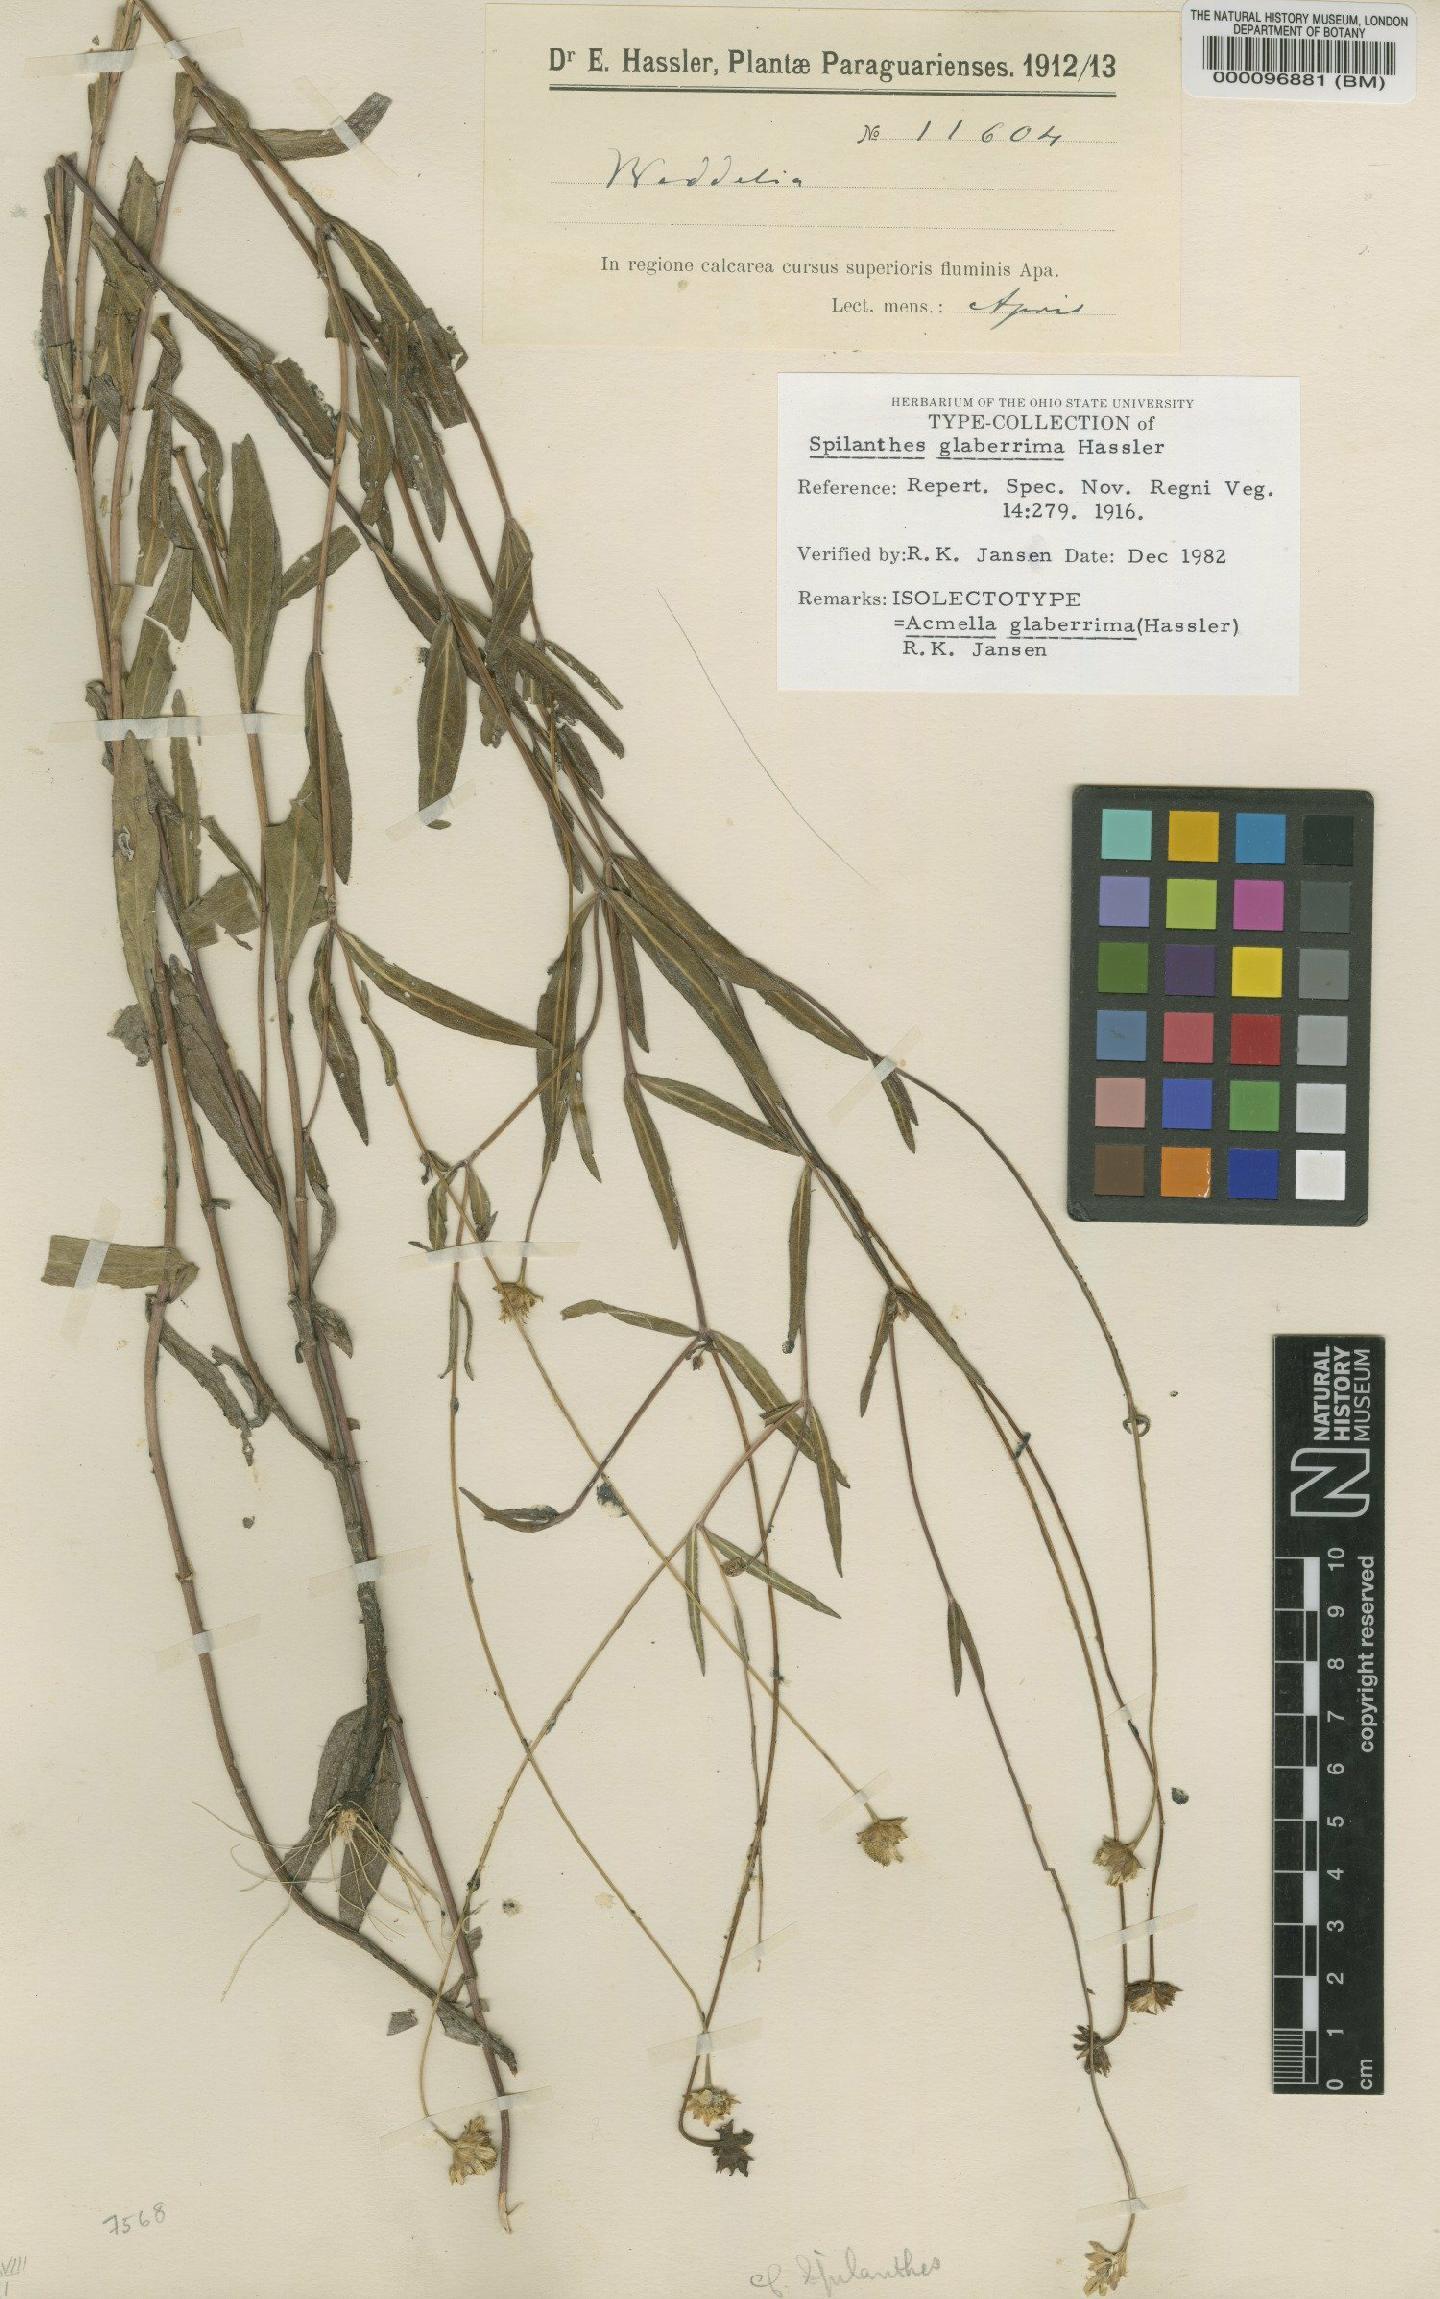 To NHMUK collection (Spilanthes glaberrima Hassl.; Isolectotype; NHMUK:ecatalogue:4565989)